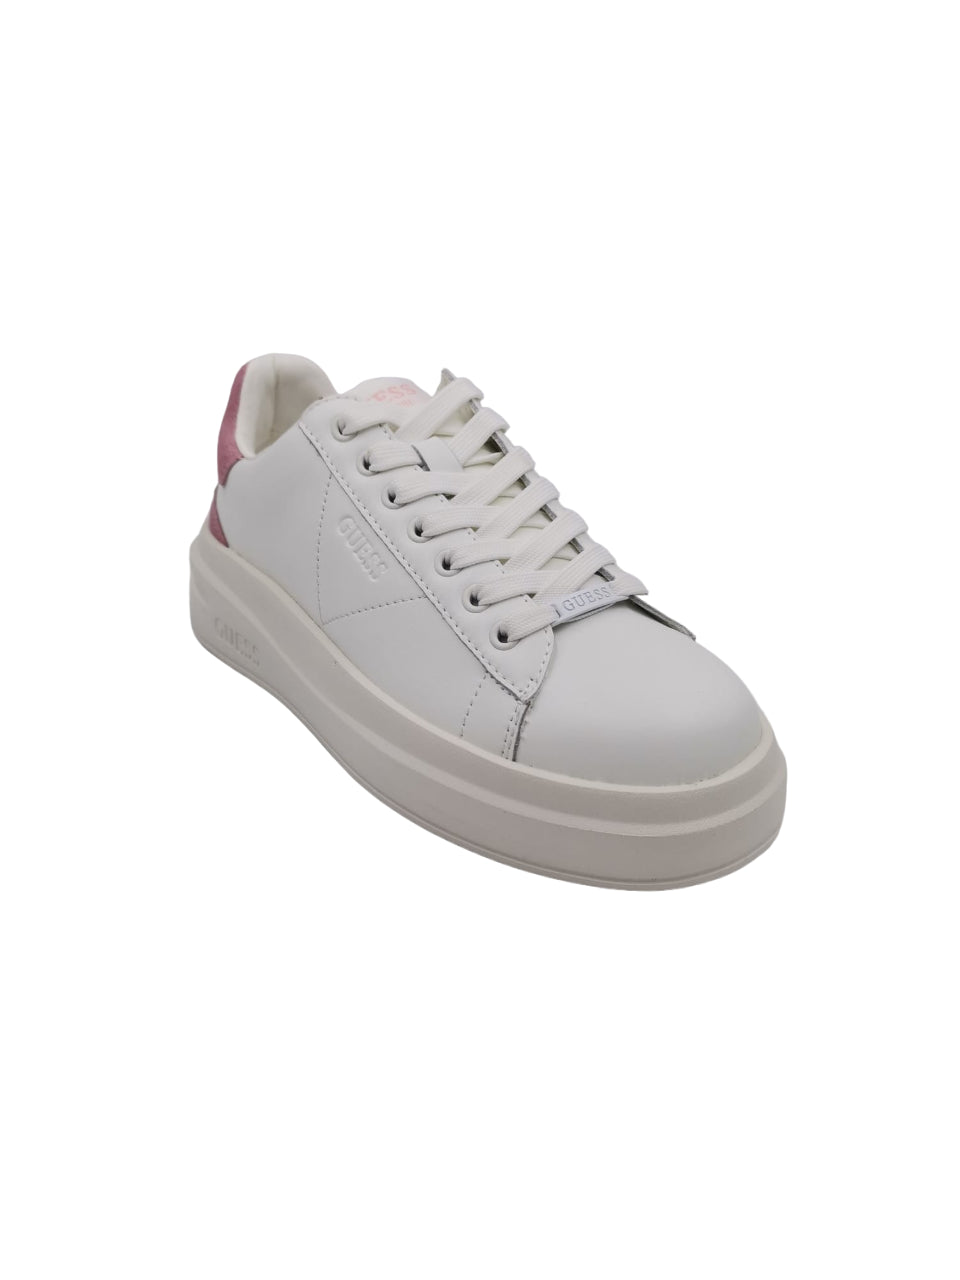 Sneakers Guess Donna Bianco/Rosa